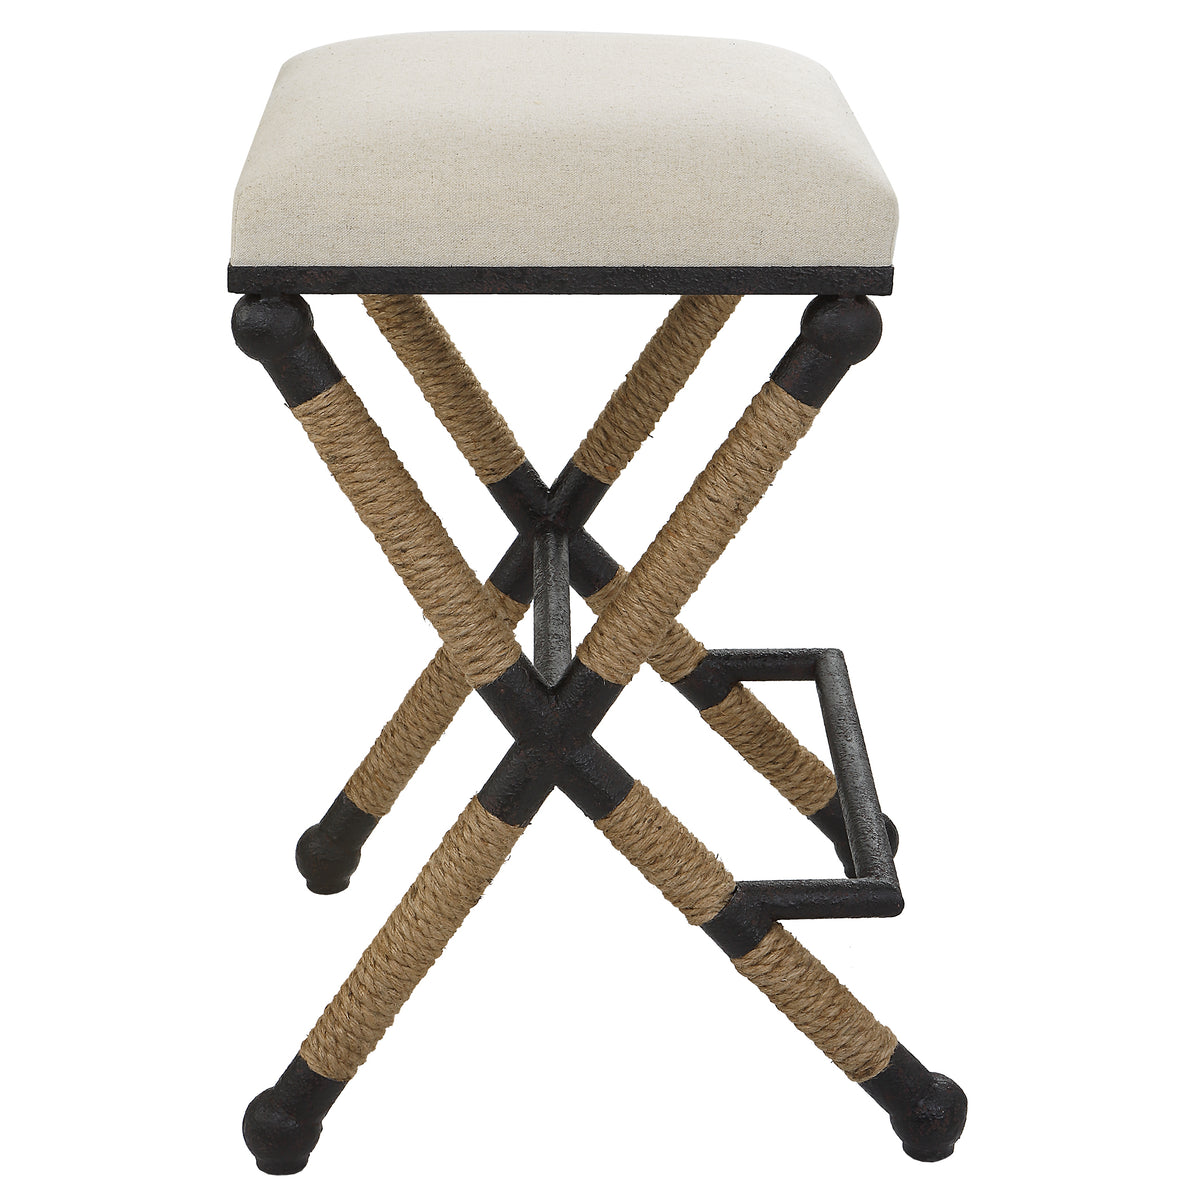 Uttermost Firth Rustic Oatmeal Counter Stool